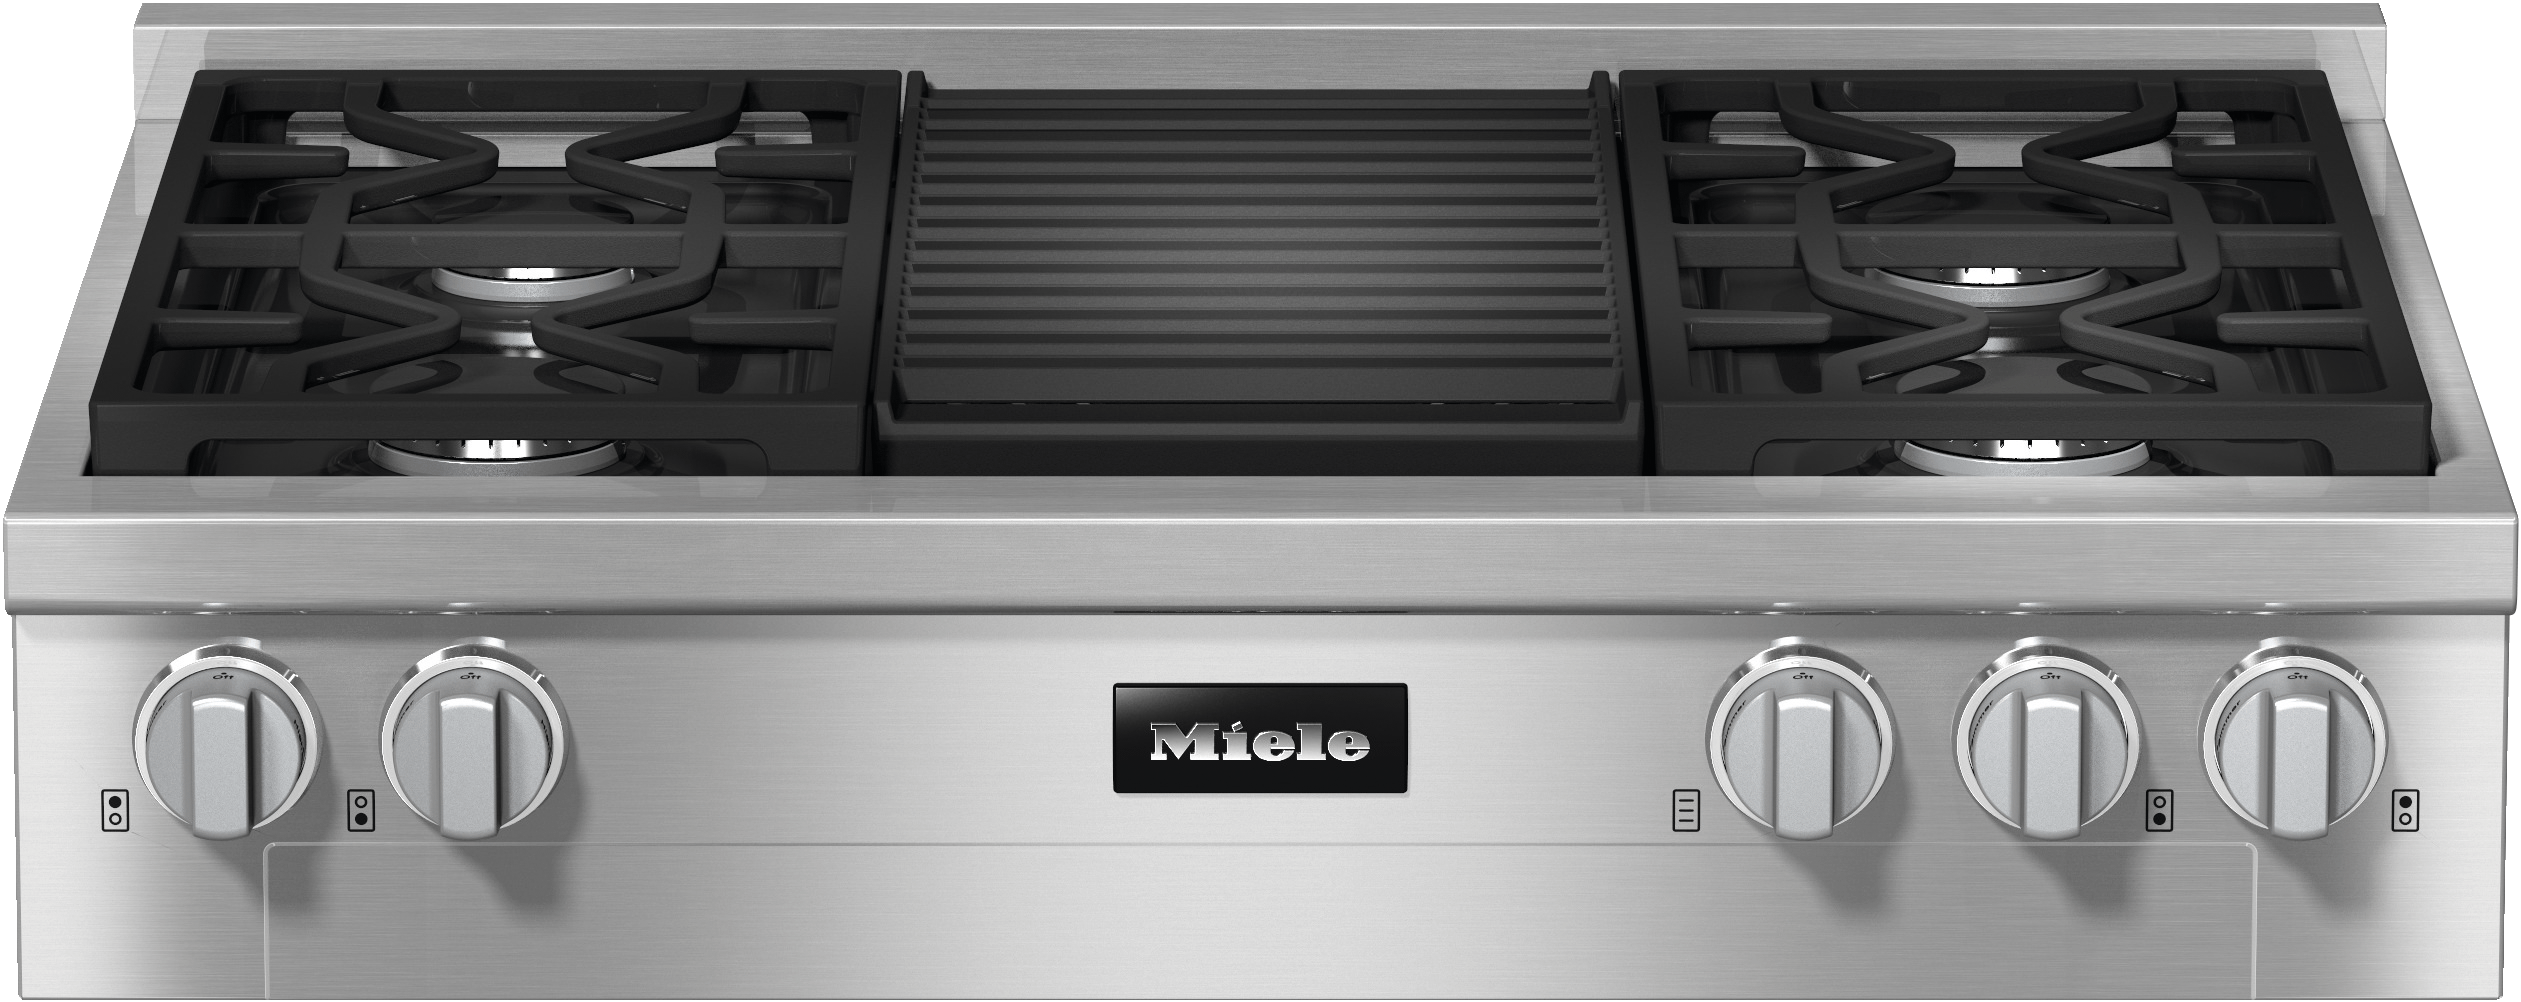 Miele CombiSet Series 15 in. 2-Burner Electric Cooktop - Stainless steel, P.C. Richard & Son